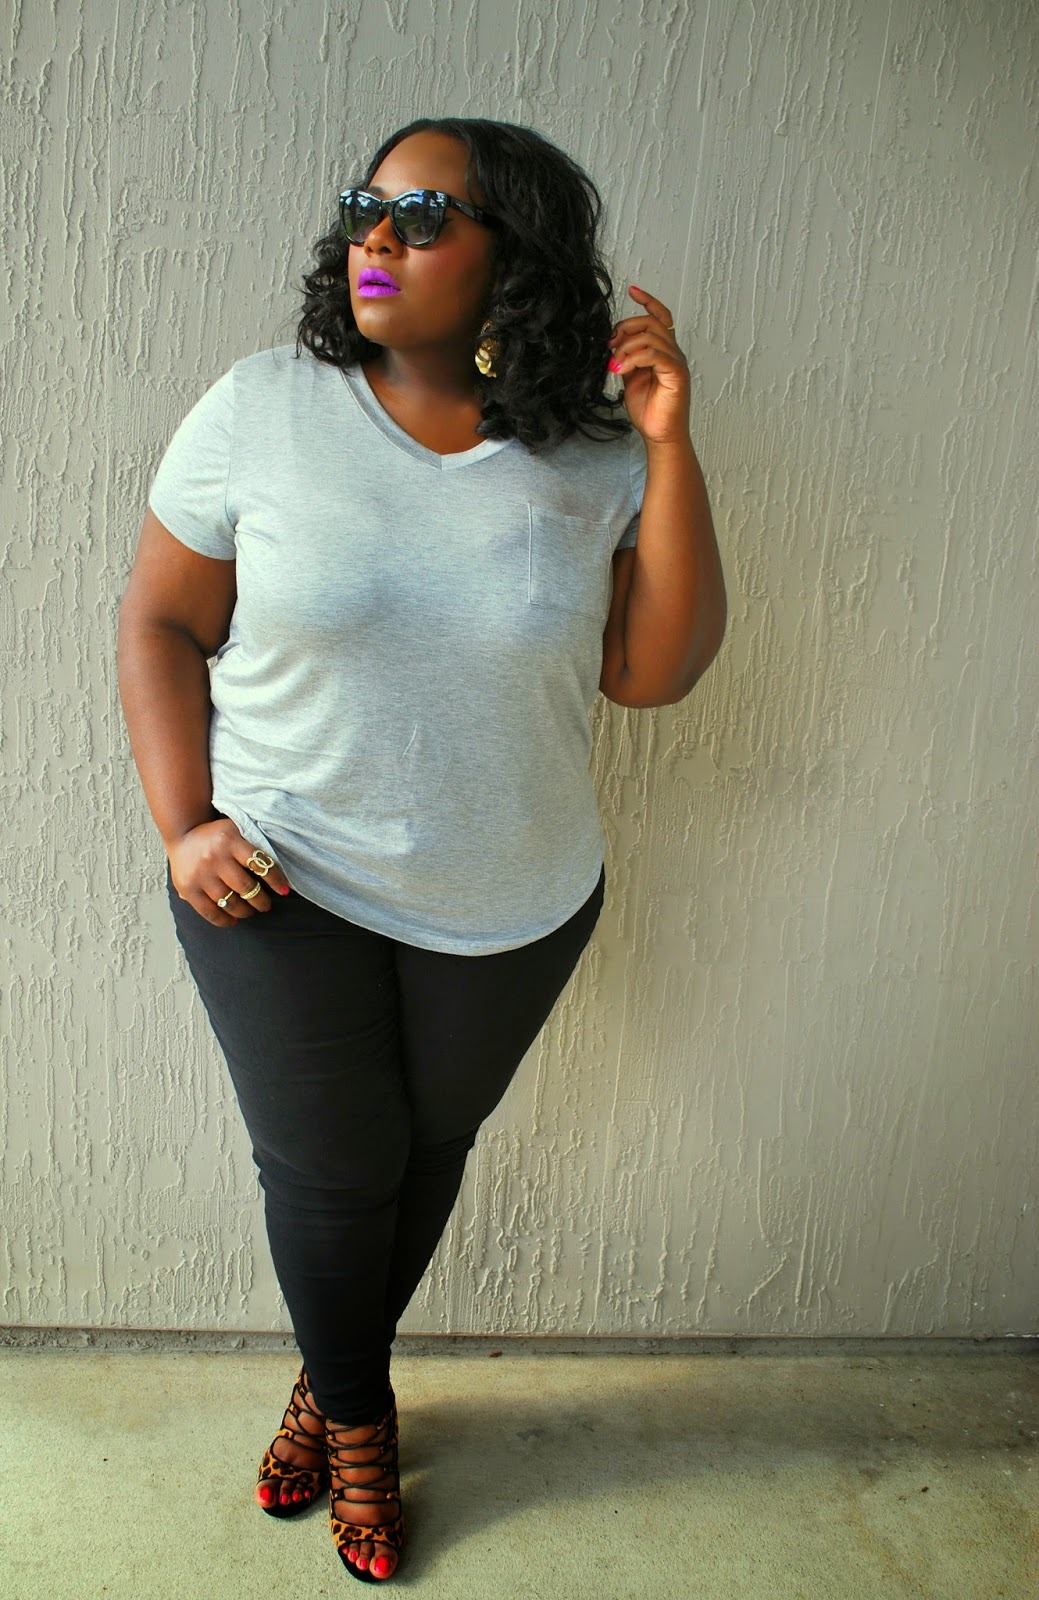 Deb Shops - Musings of a Curvy Lady’s basic look is anything...